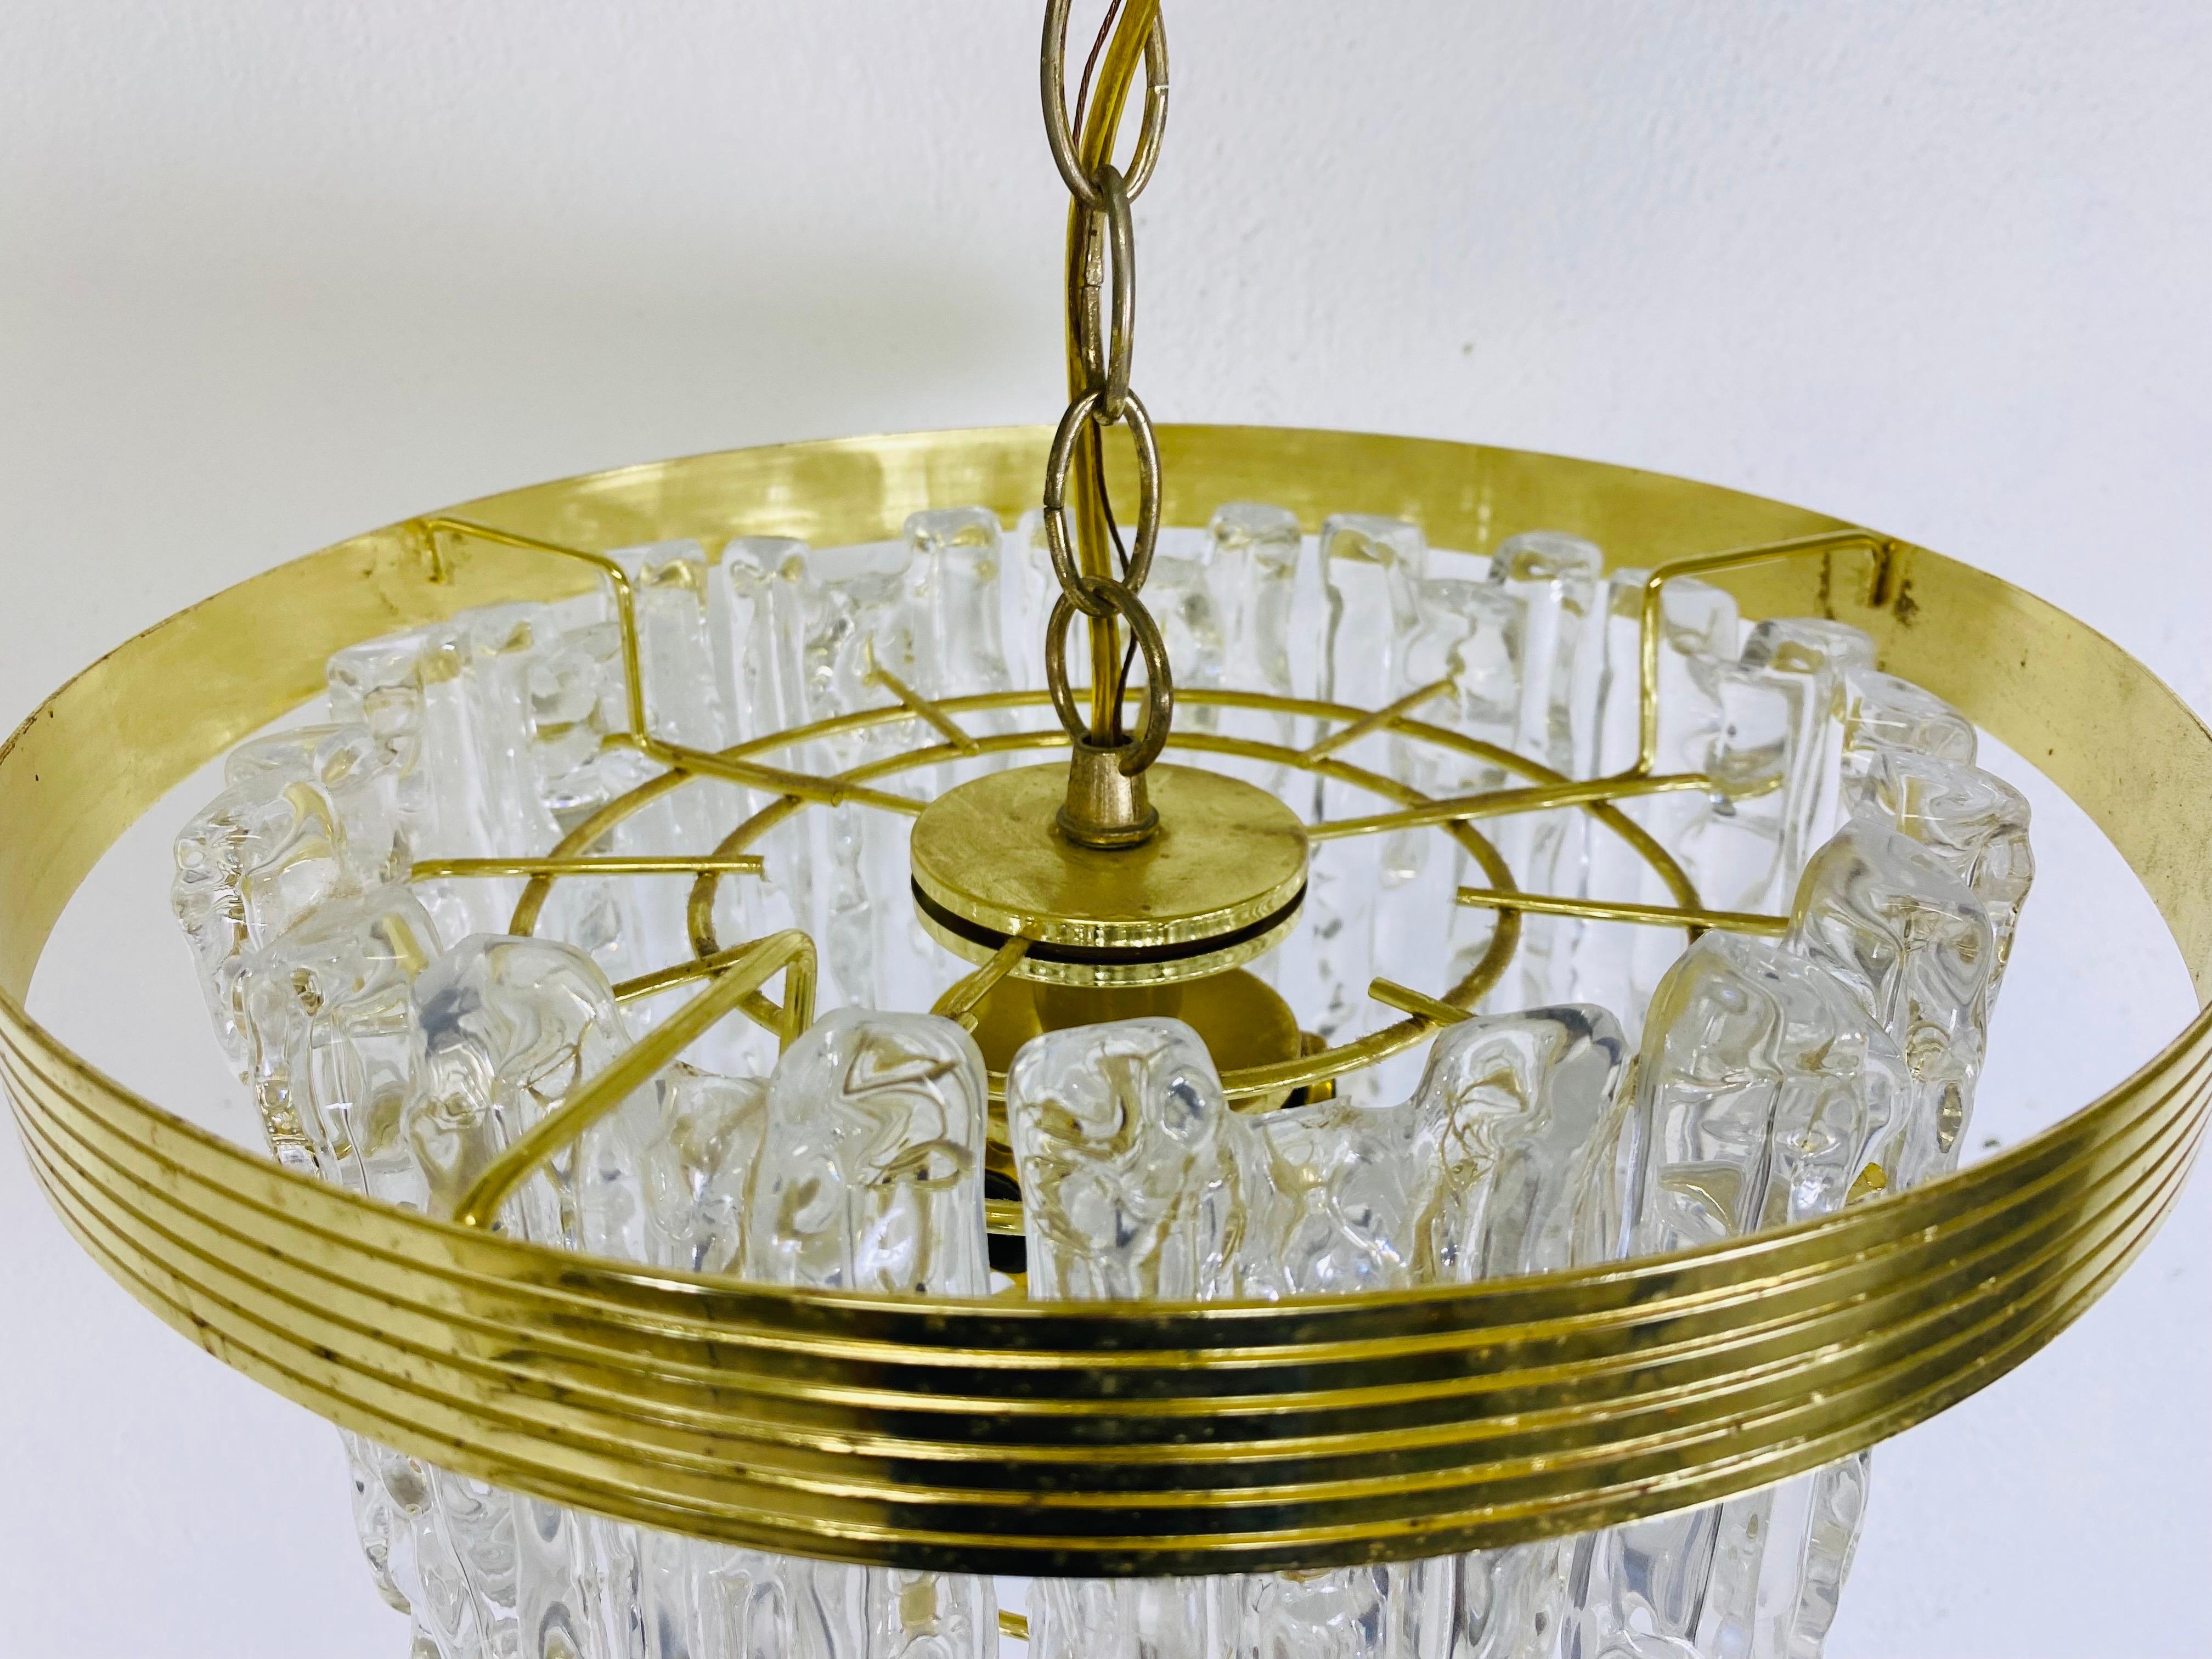 Amsterdam School Vintage Mid-Century Modern Lucite and Brass Waterfall Style Chandelier For Sale